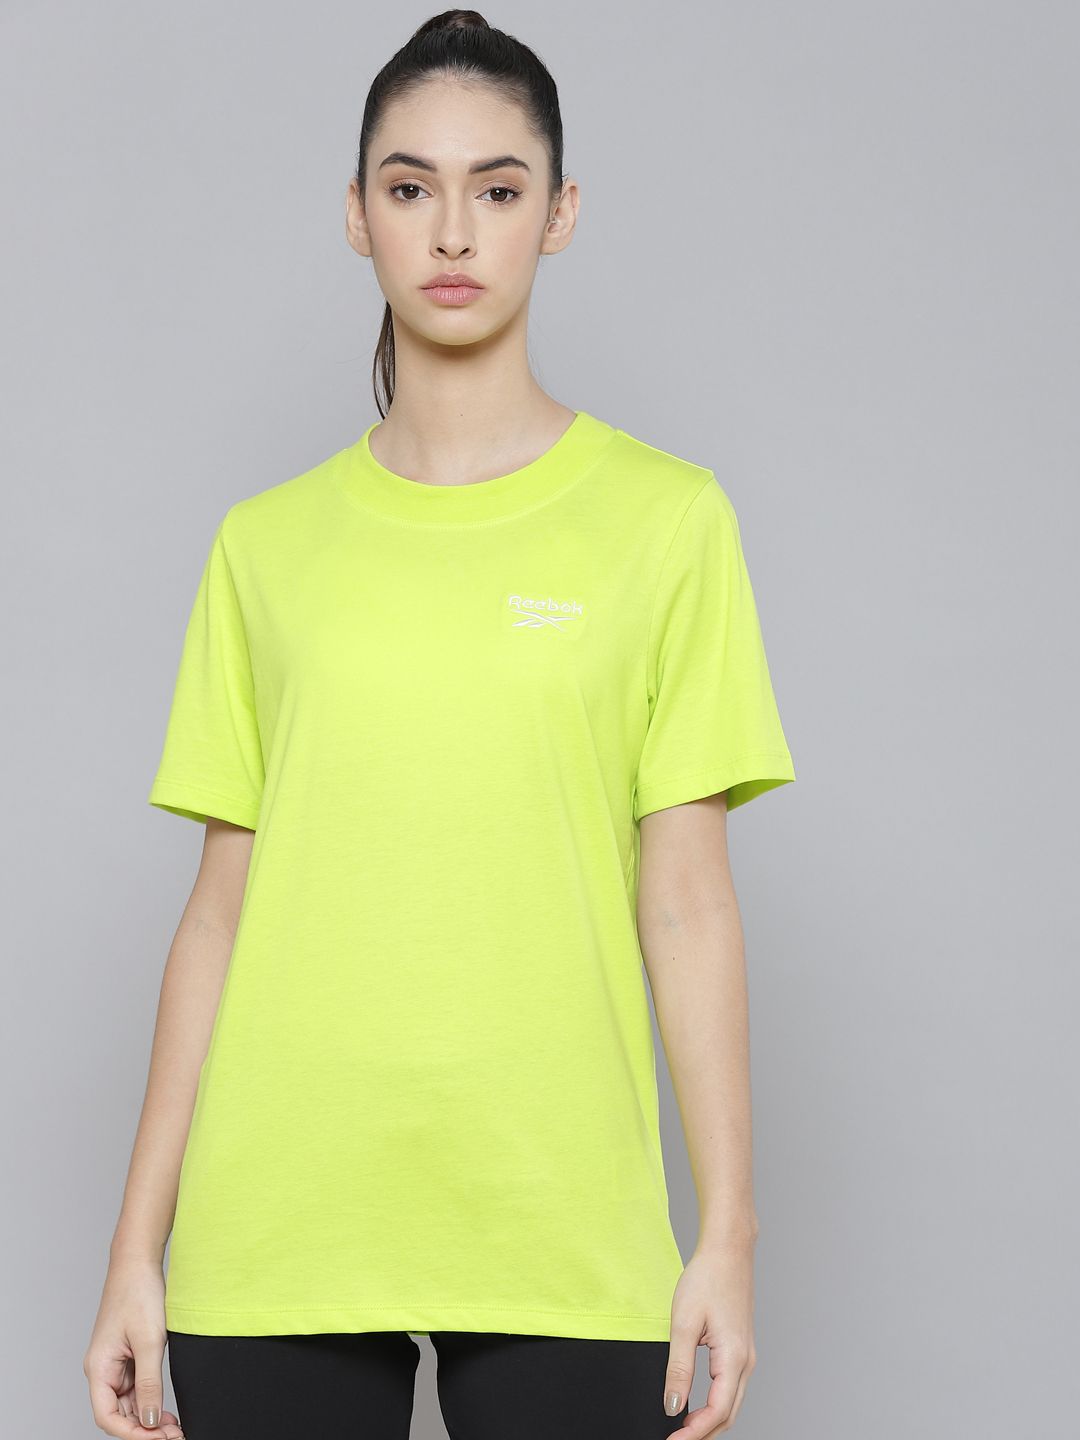 Reebok Women Fluorescent Green Solid Training T-shirt Price in India